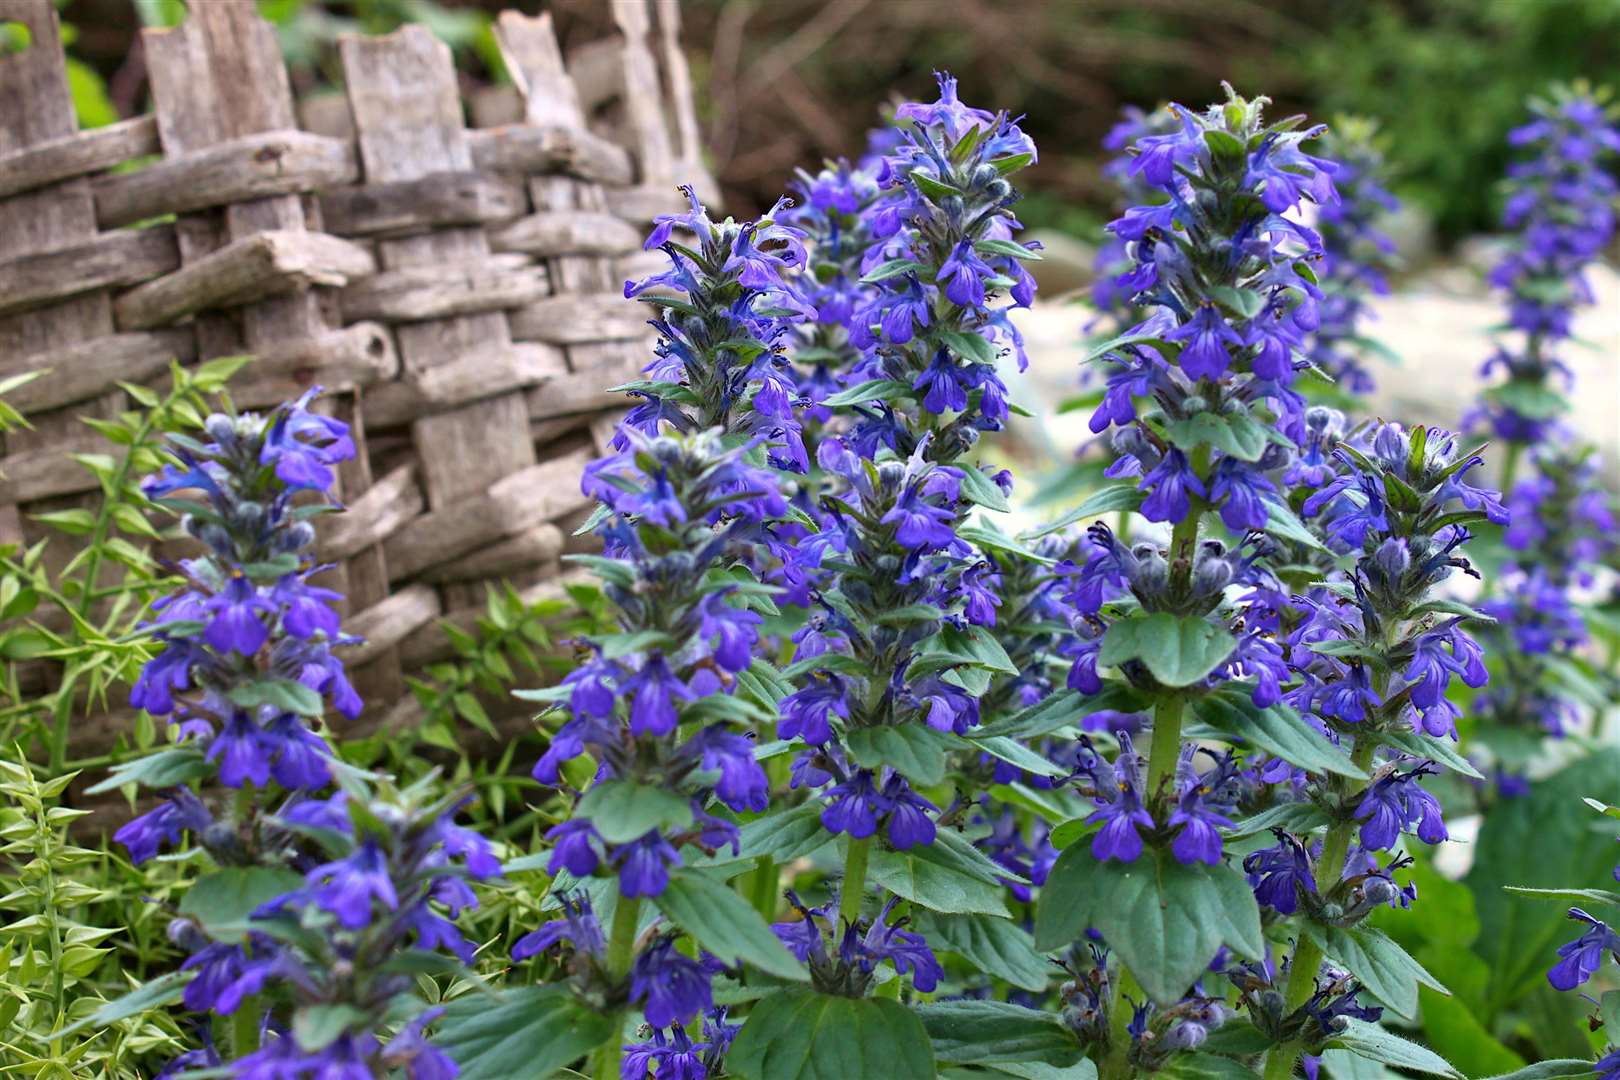 If you have a difficult spot to fill, such as a steep bank in shade, Ajuga reptans (bugle) is a strong evergreen, which carries spikes of blue flowers from late spring to midsummer. Picture: iStock/PA